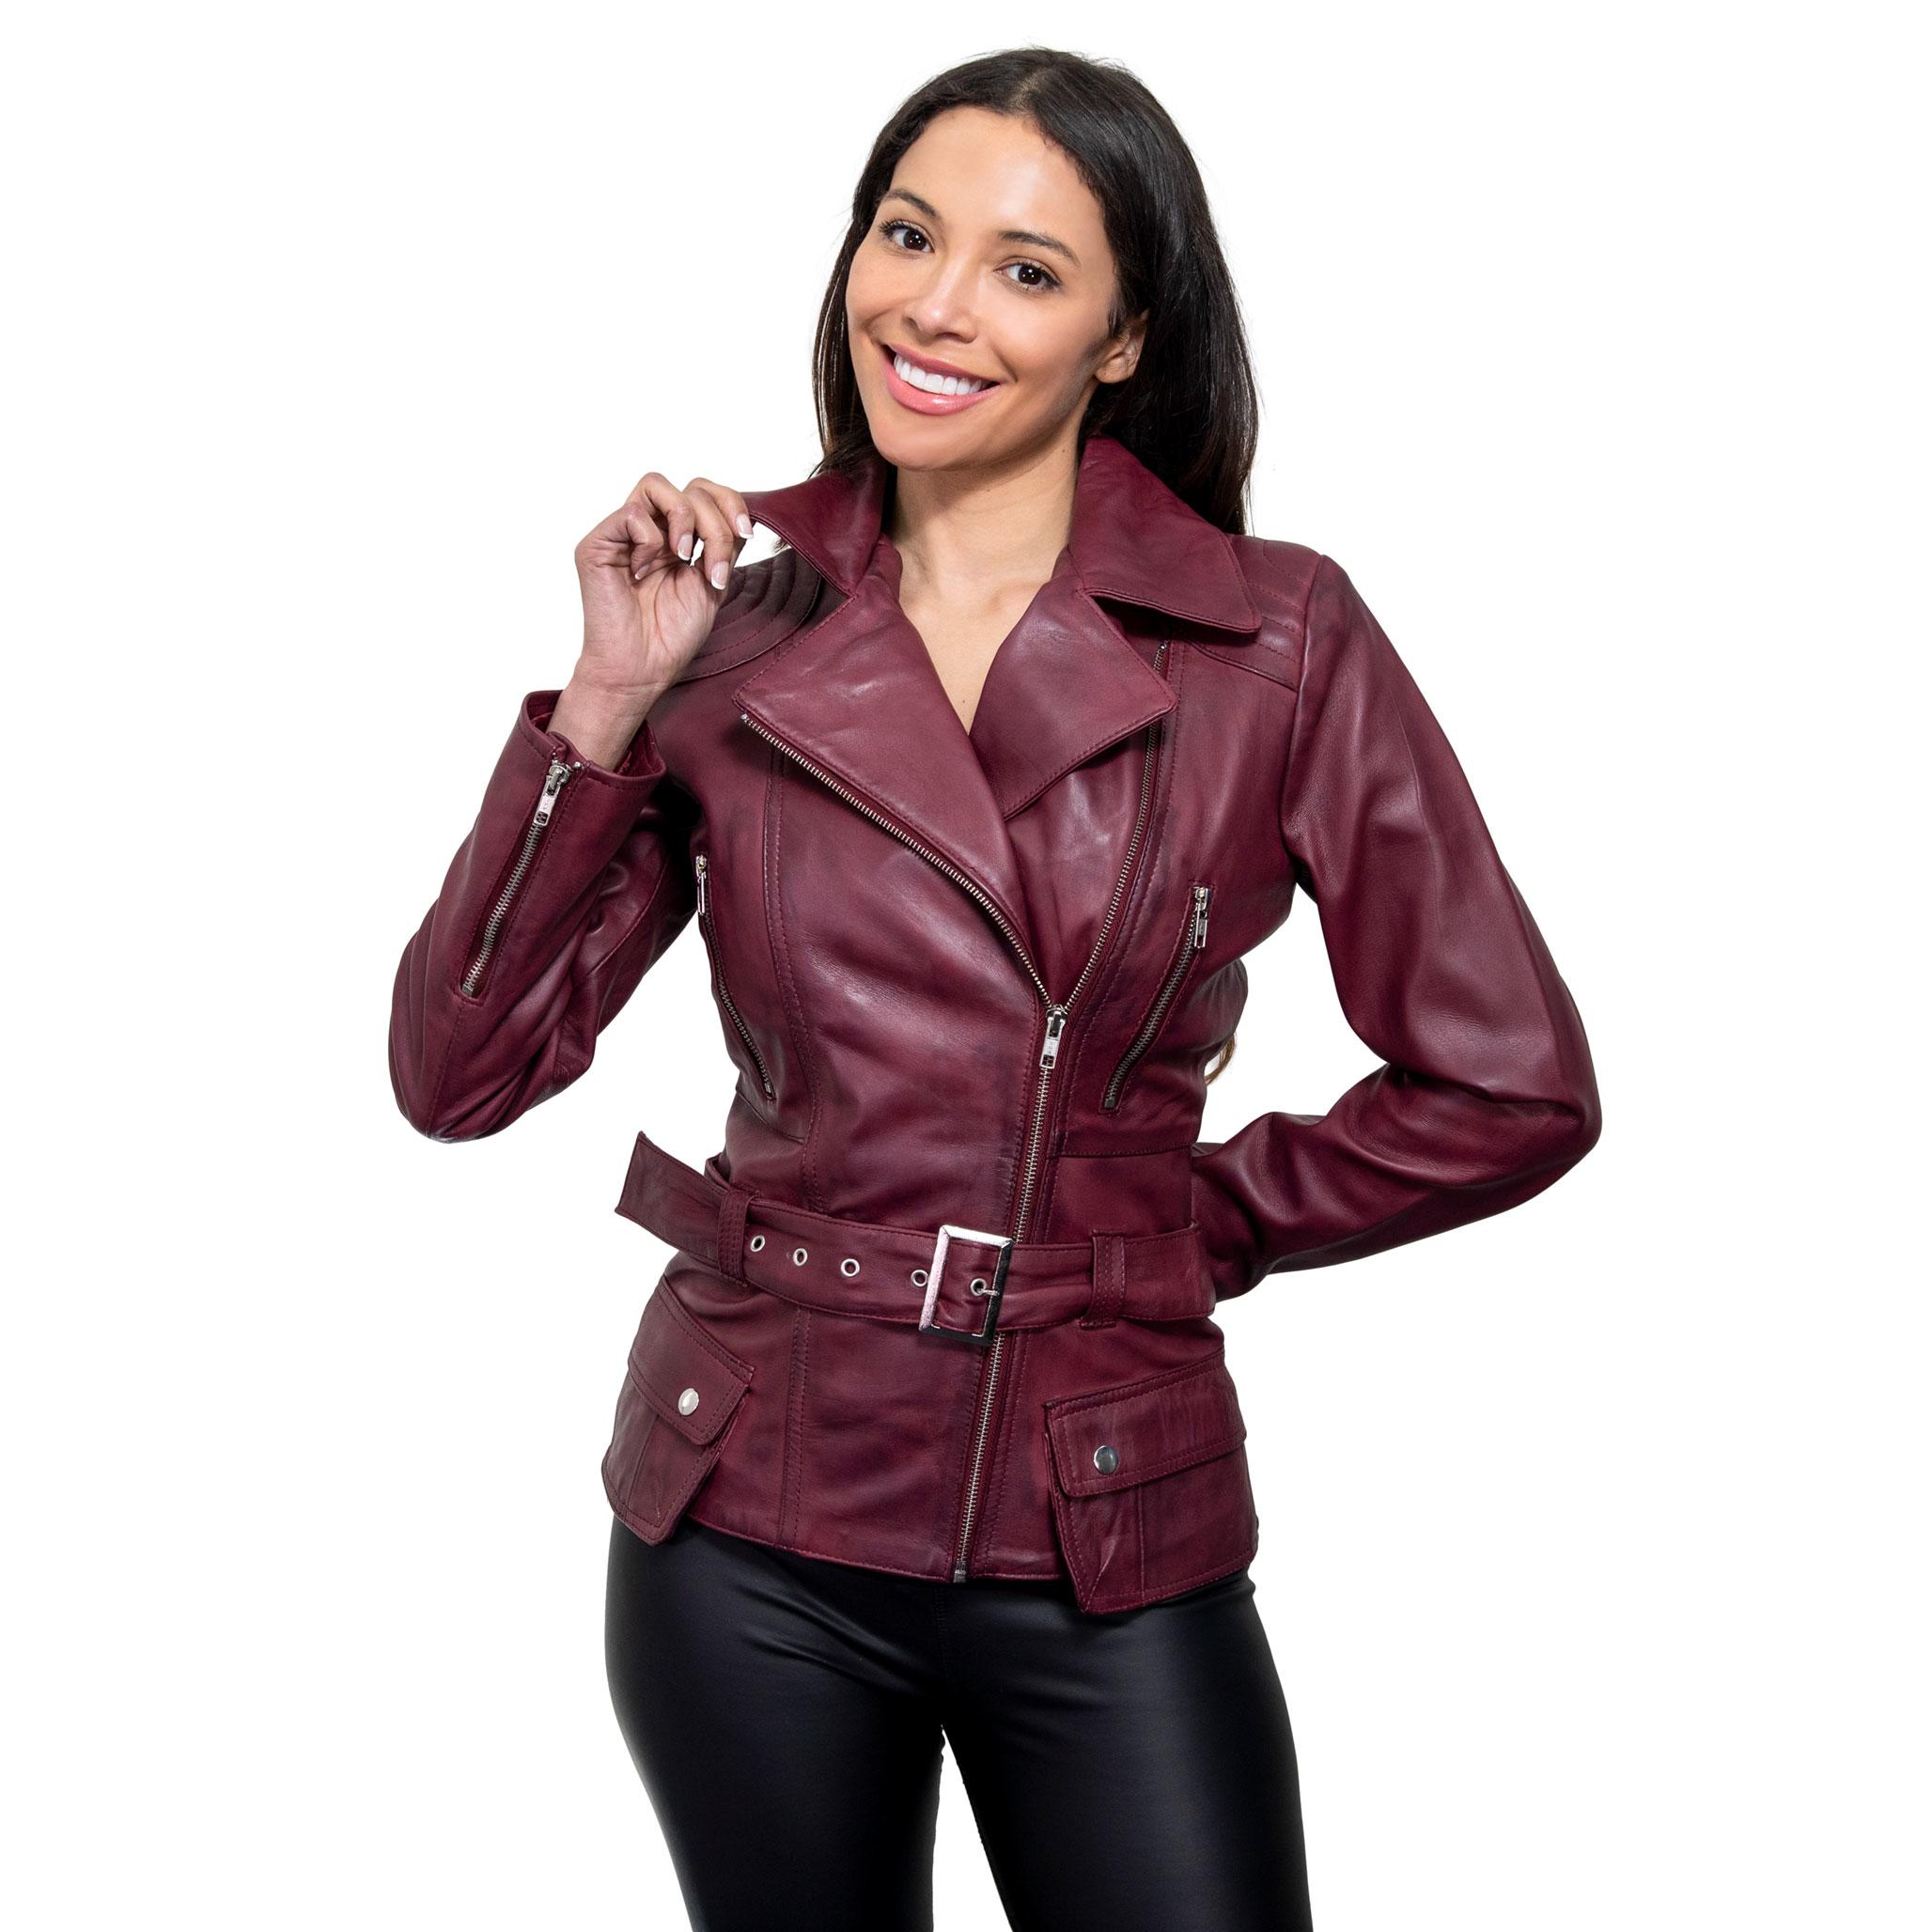 A female model smiles, wearing a long, premium leather jacket in a burgundy colour. The jacket features diagonal zips, small pockets, with a off centred front zip fastening, and a belted fastening.